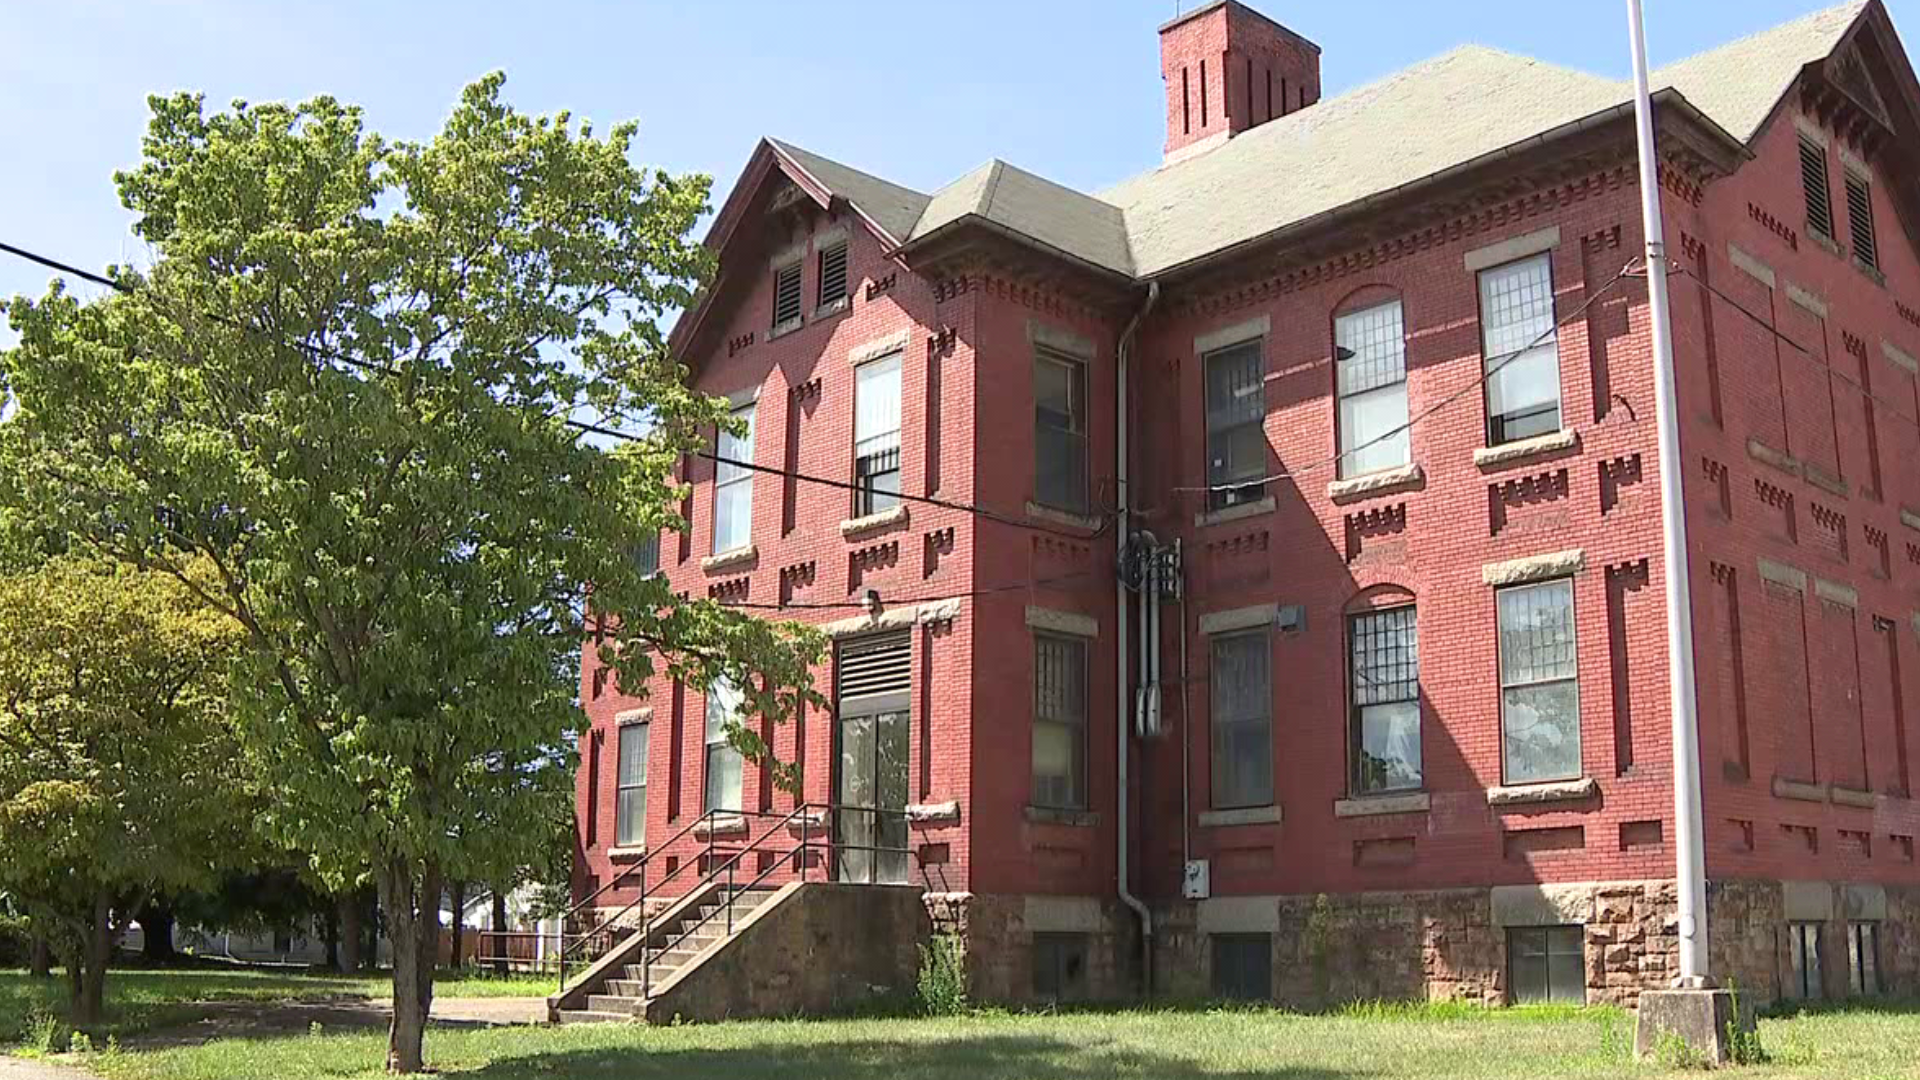 Volunteers with "The Improved Milton Experience" are trying to preserve two historical properties.